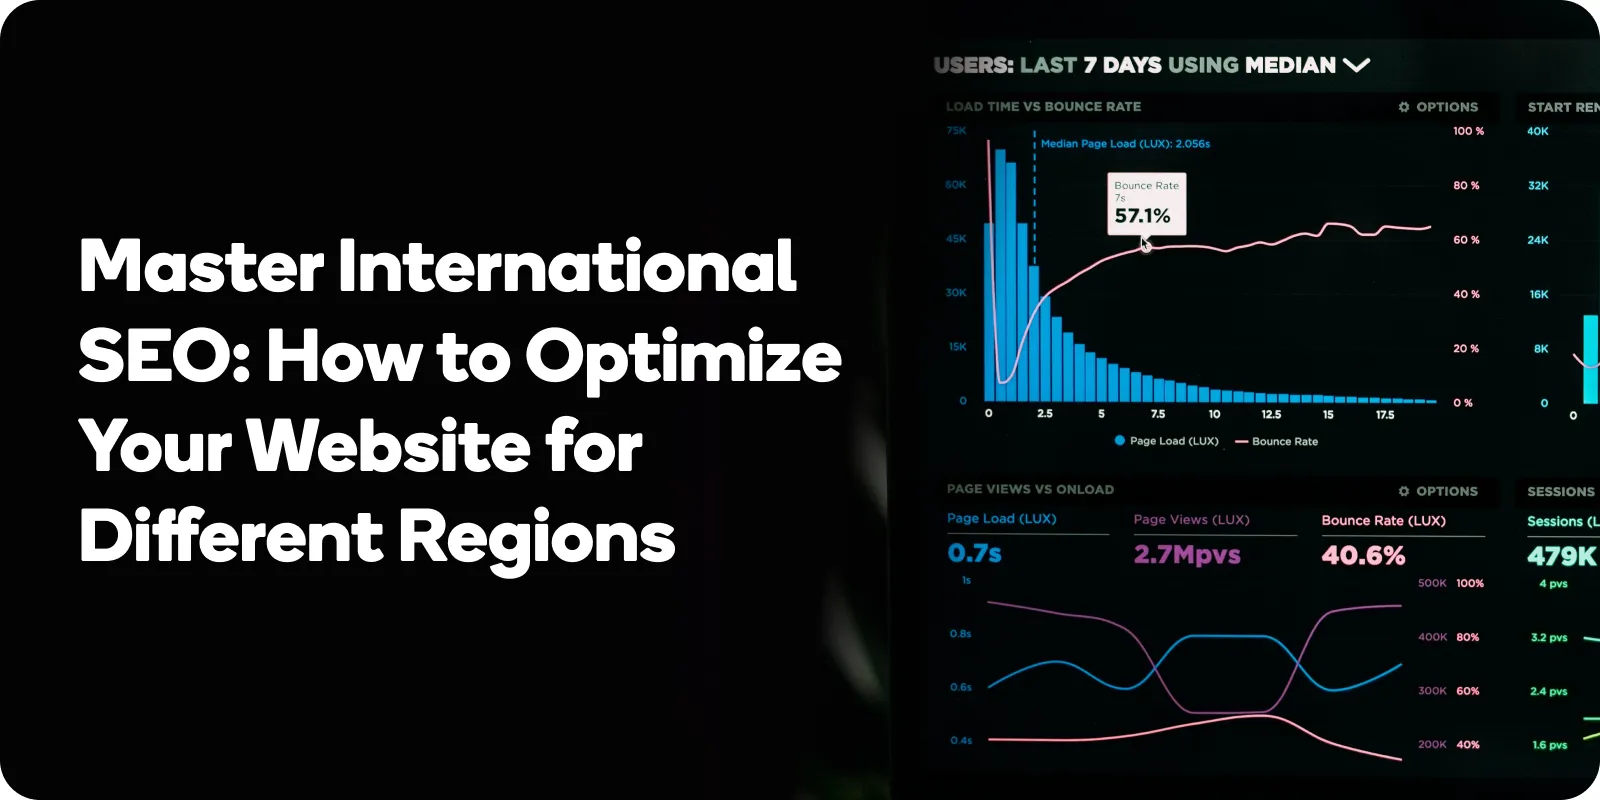 Master-International-SEO-How-to-Optimize-Your-Website-for-Different-Regions